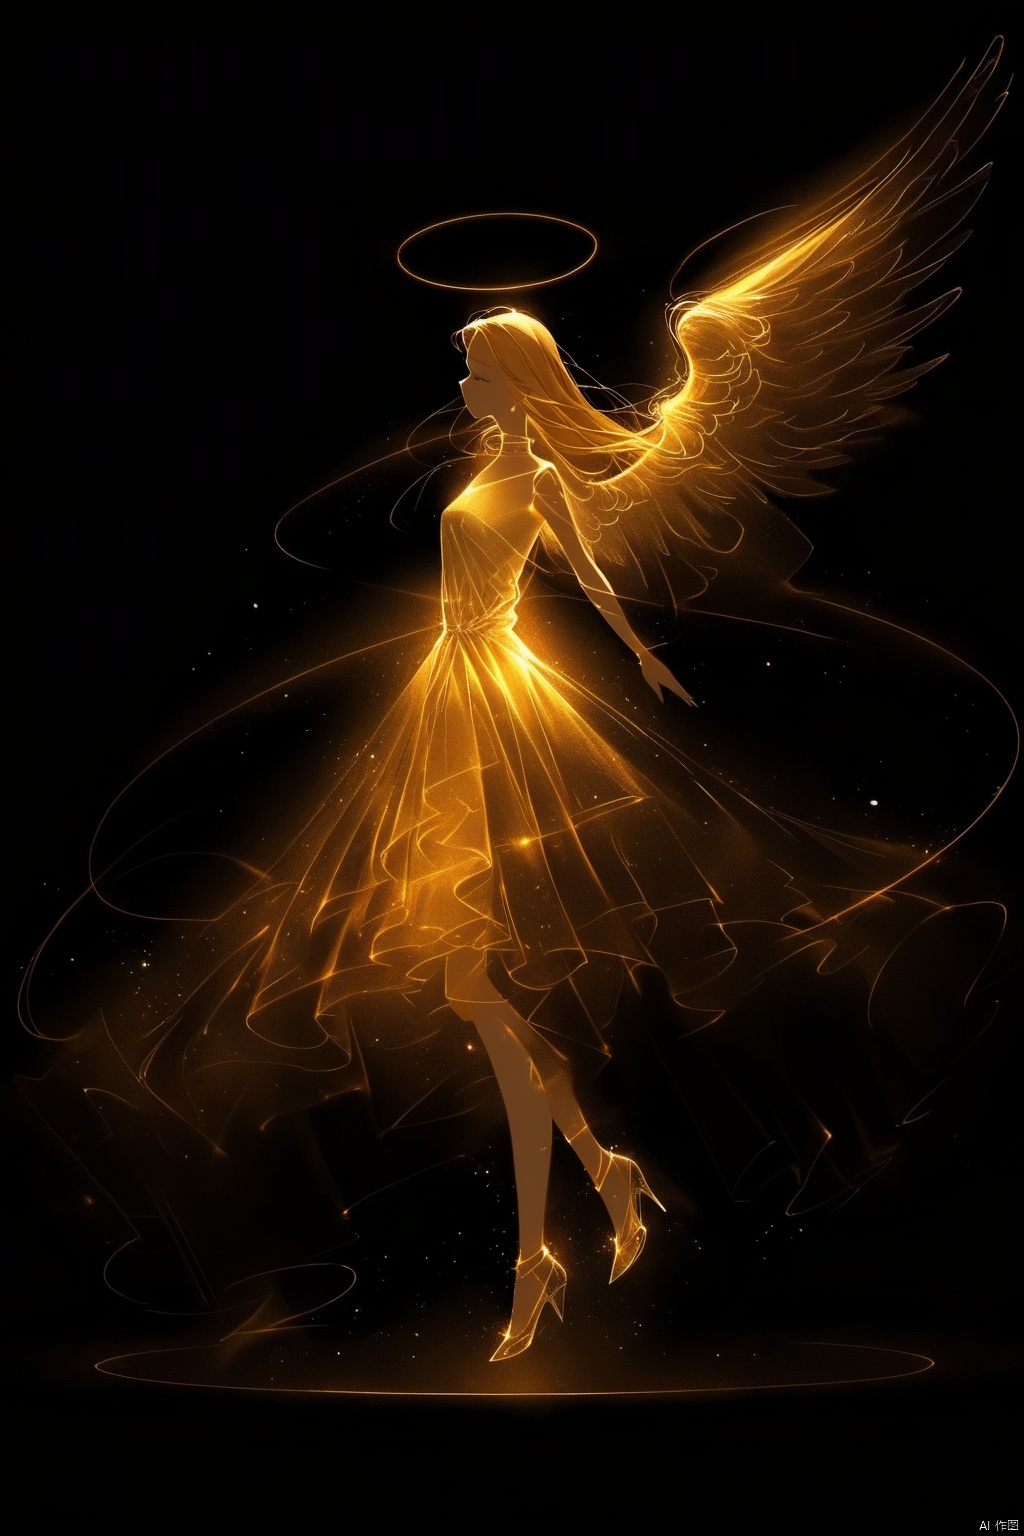  1 girl,solo,Long hair,Breasts,blonde,Simple,background,Dress,Bare,shoulders,Extra long hair,Permanent,all over,Close your eyes,wing,White dress,High heels,From the side,flicker,Strapless,outline,Floating hair,Luminous
halo,Black background,Feathered wings,Light particles,Angel's Wings,angel